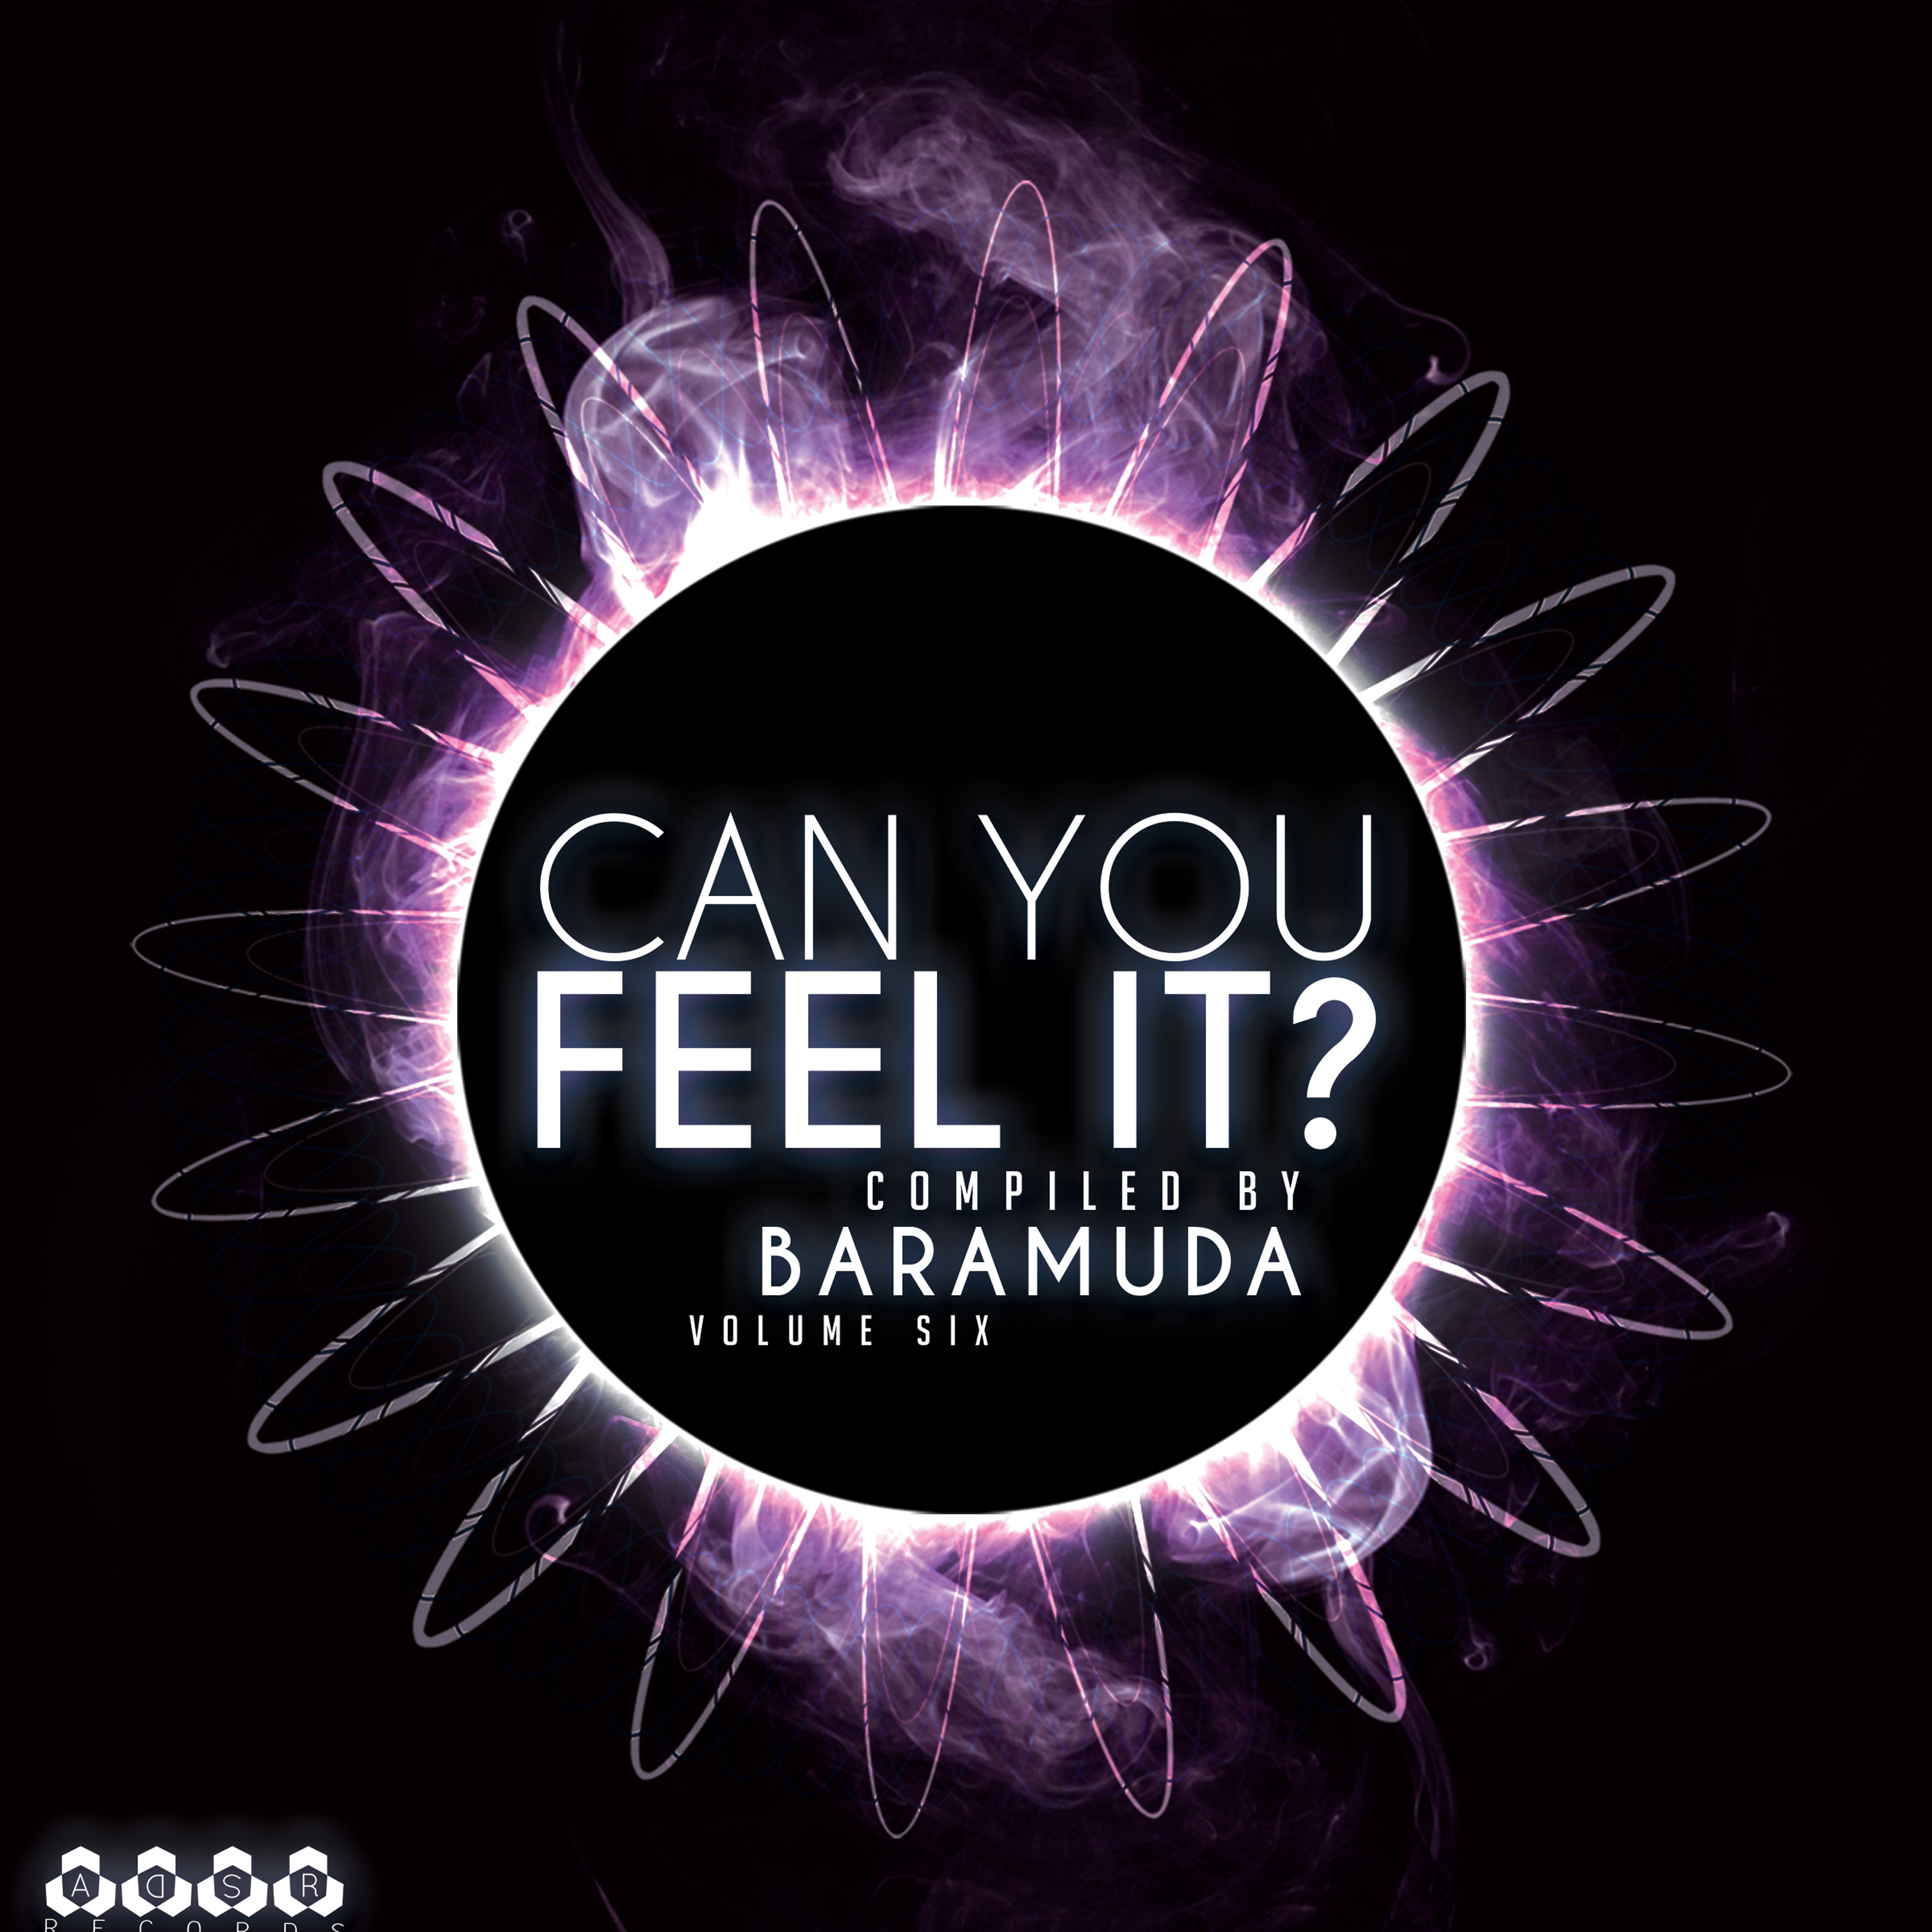 Can You Feel It?, Vol. 6 (Compiled By Baramuda)